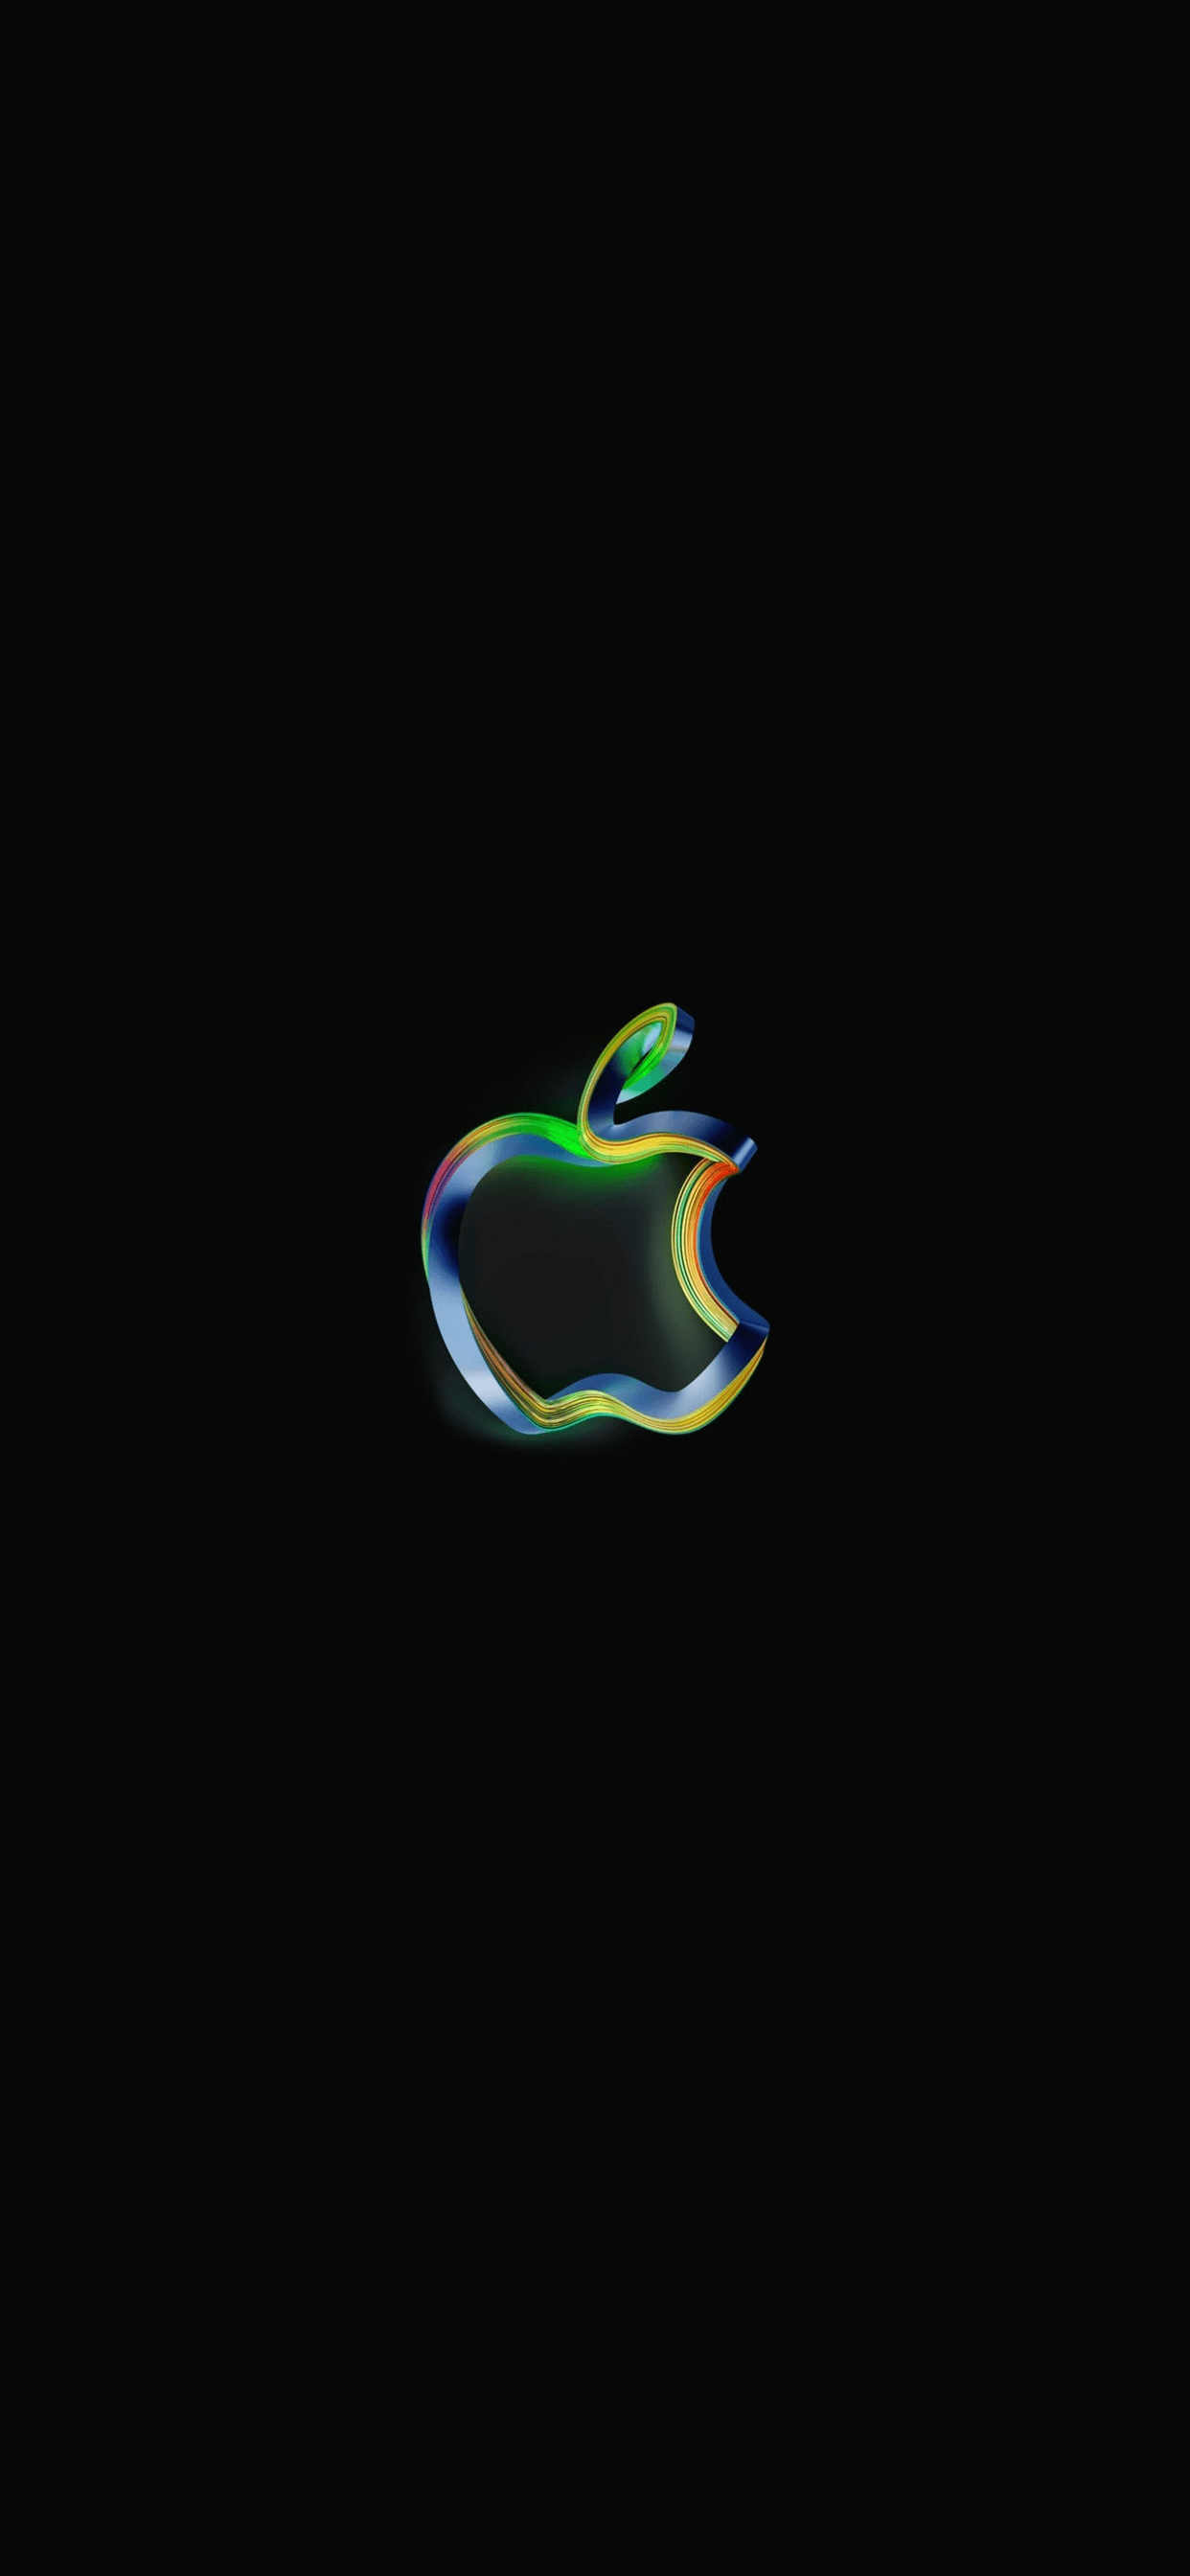 Apple Plus Logo - Apple logo Wallpaper for iPhone X, 8, 7, 6 - Free Download on ...